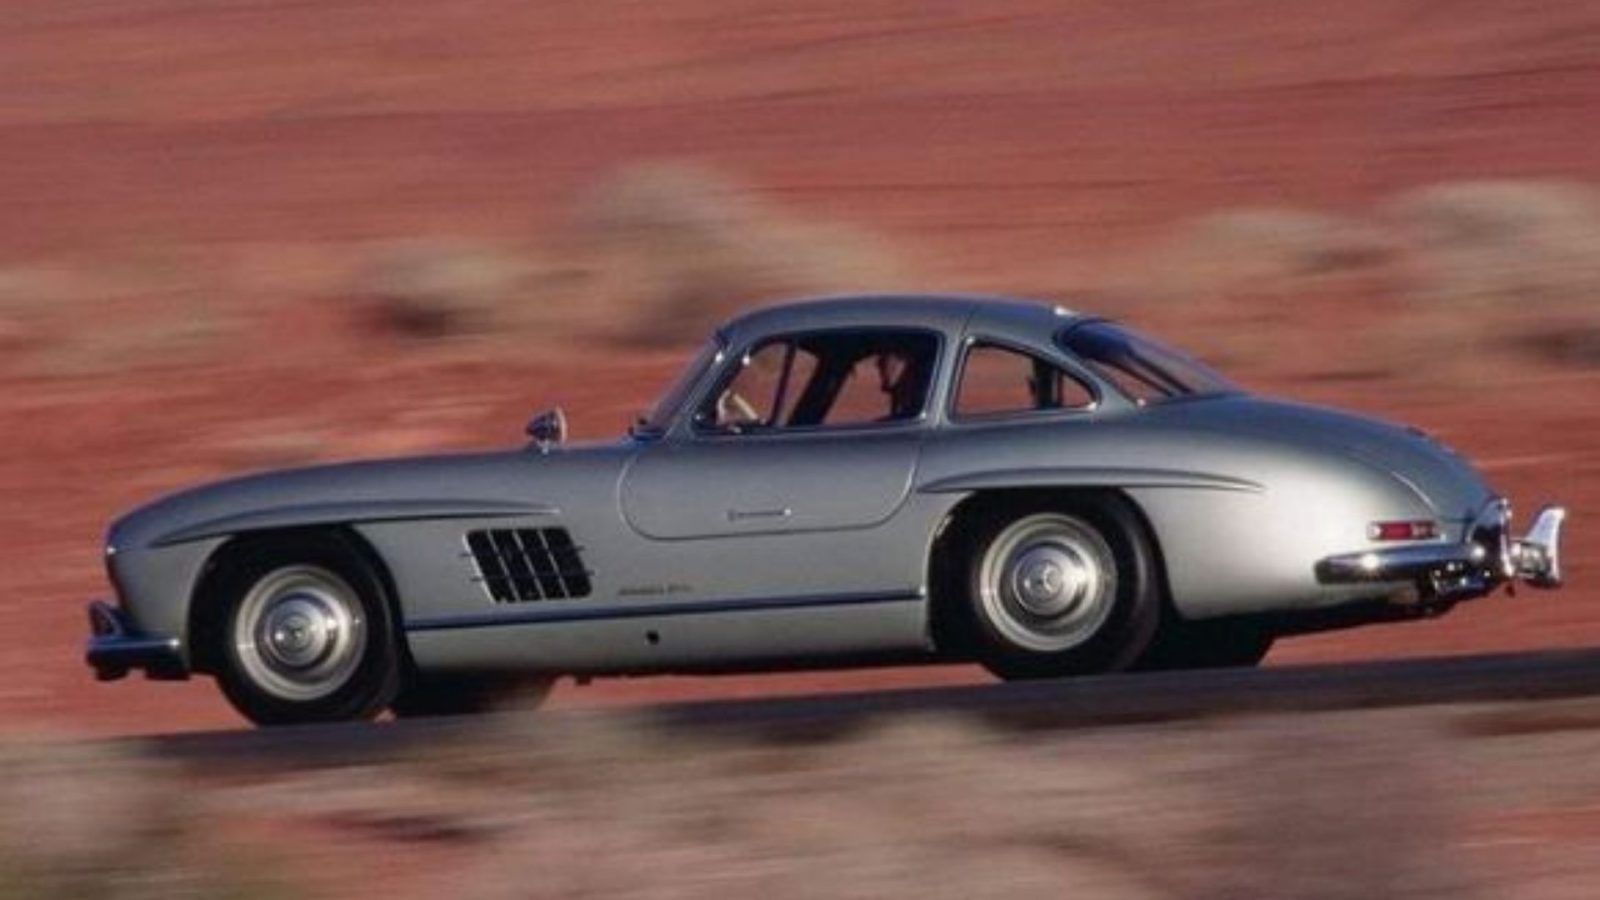 Mercedes-Benz 300 SLR may be the most expensive classic car ever sold